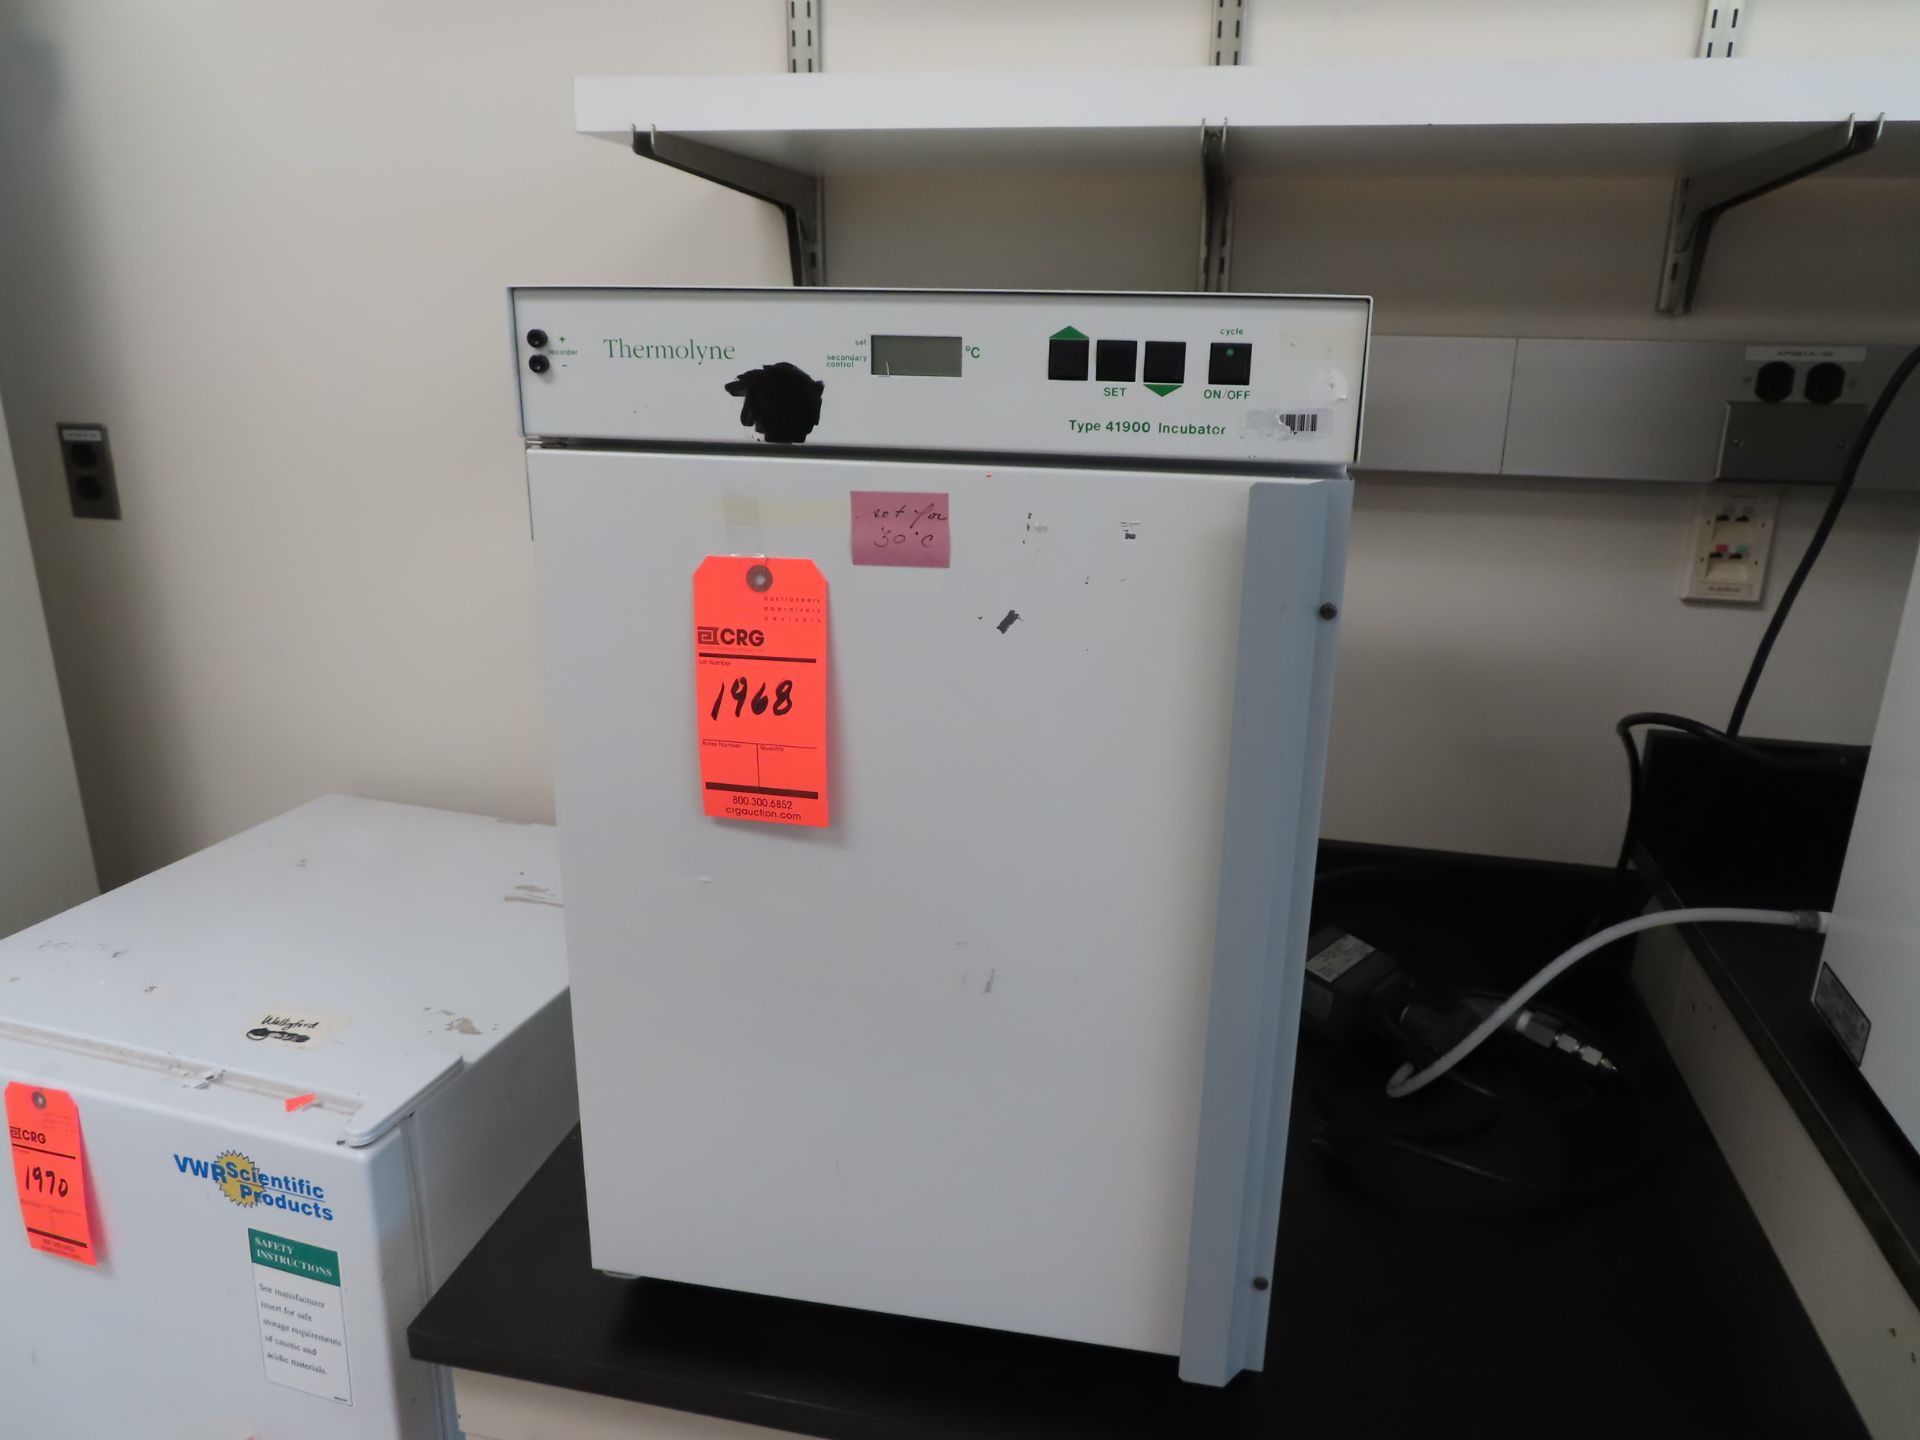 Thermolyne I41925, type 41900, s/n 70096125 benchtop incubator, located C wing, 3rd floor, room